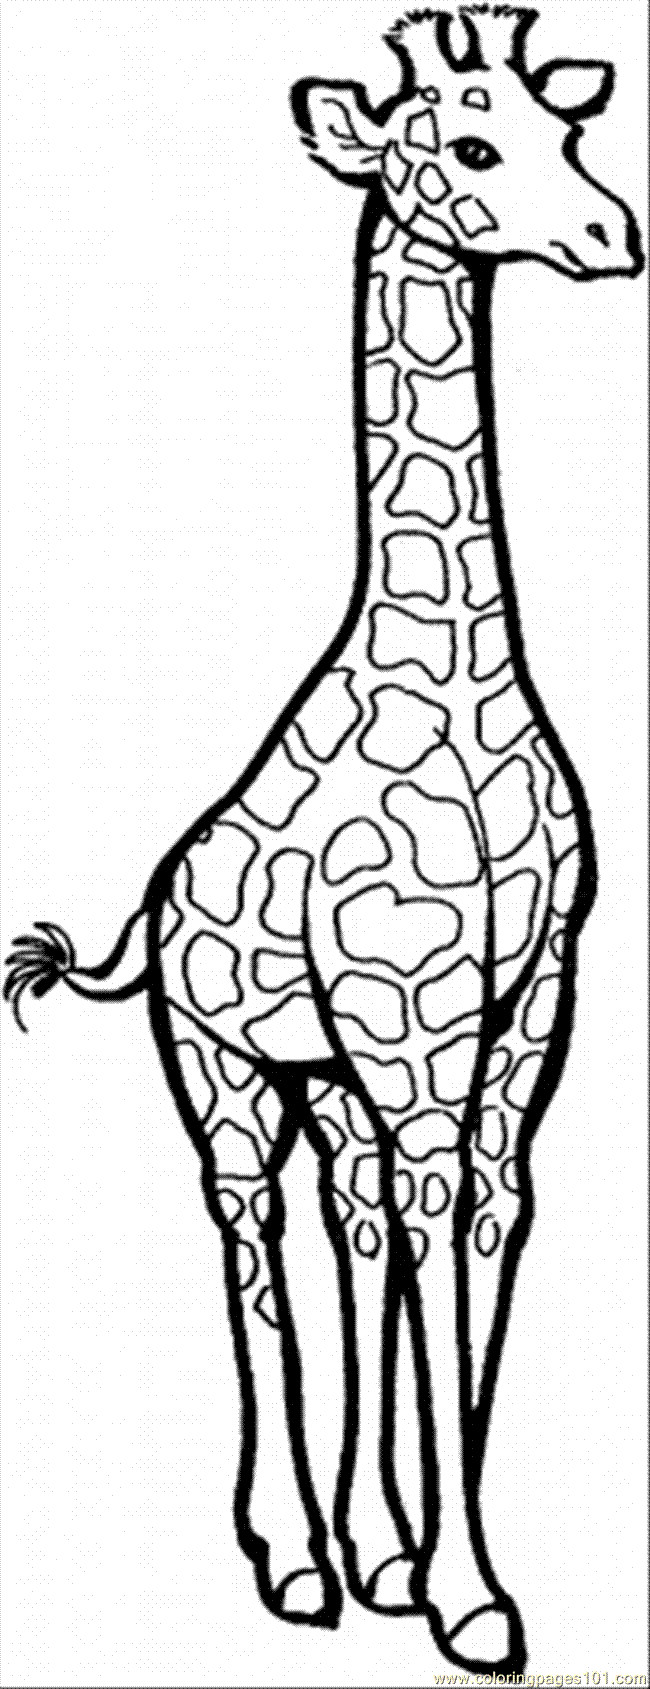 Baby Giraffe Coloring Page
 cute giraffe coloring pages